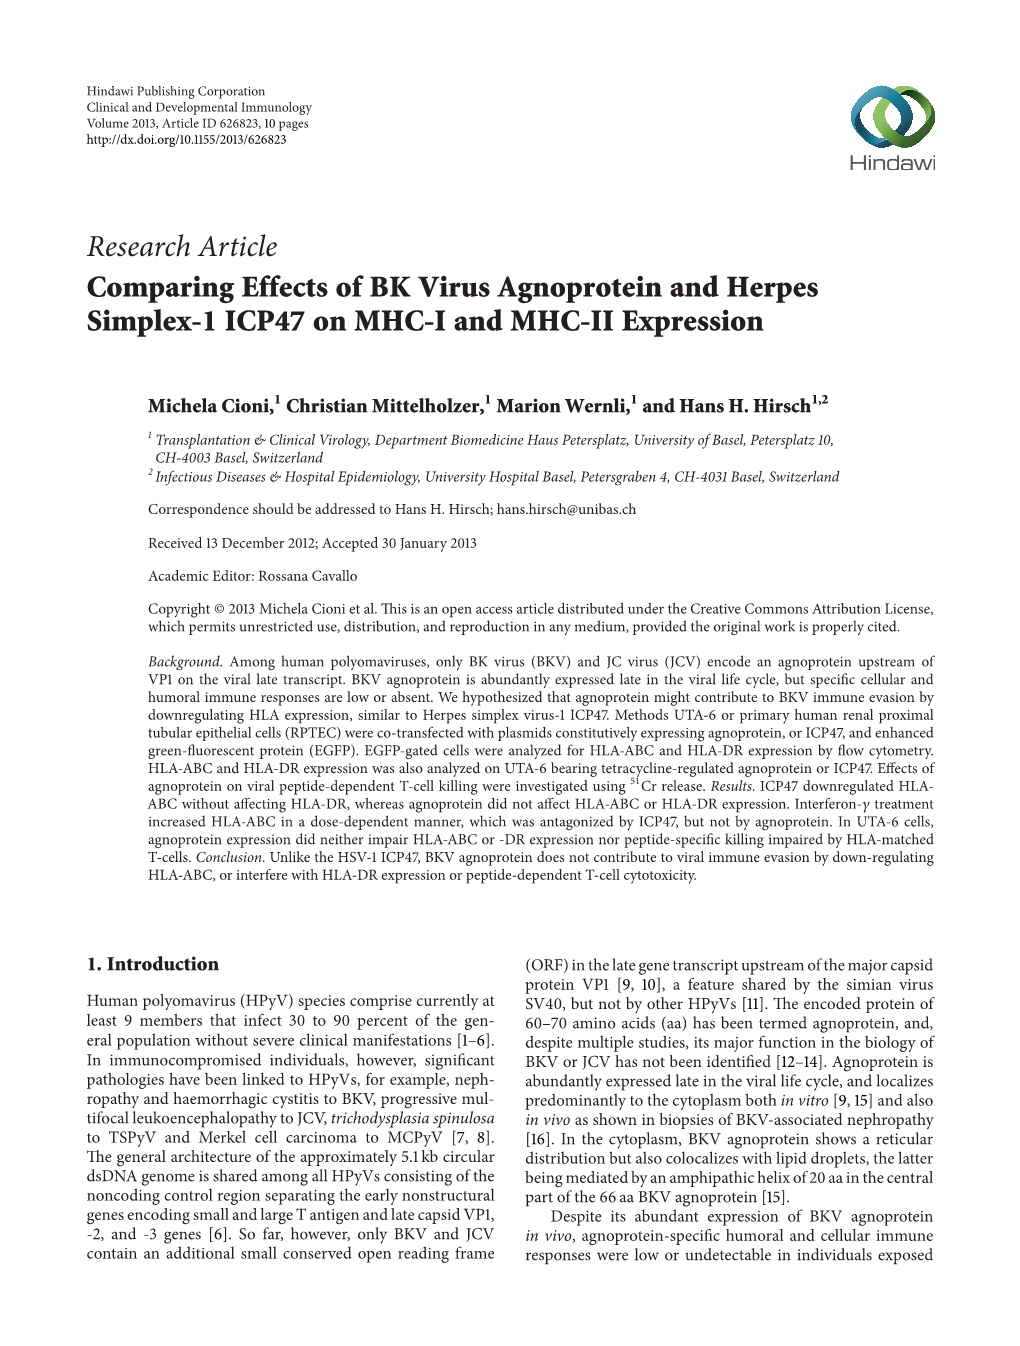 Comparing Effects of BK Virus Agnoprotein and Herpes Simplex-1 ICP47 on MHC-I and MHC-II Expression